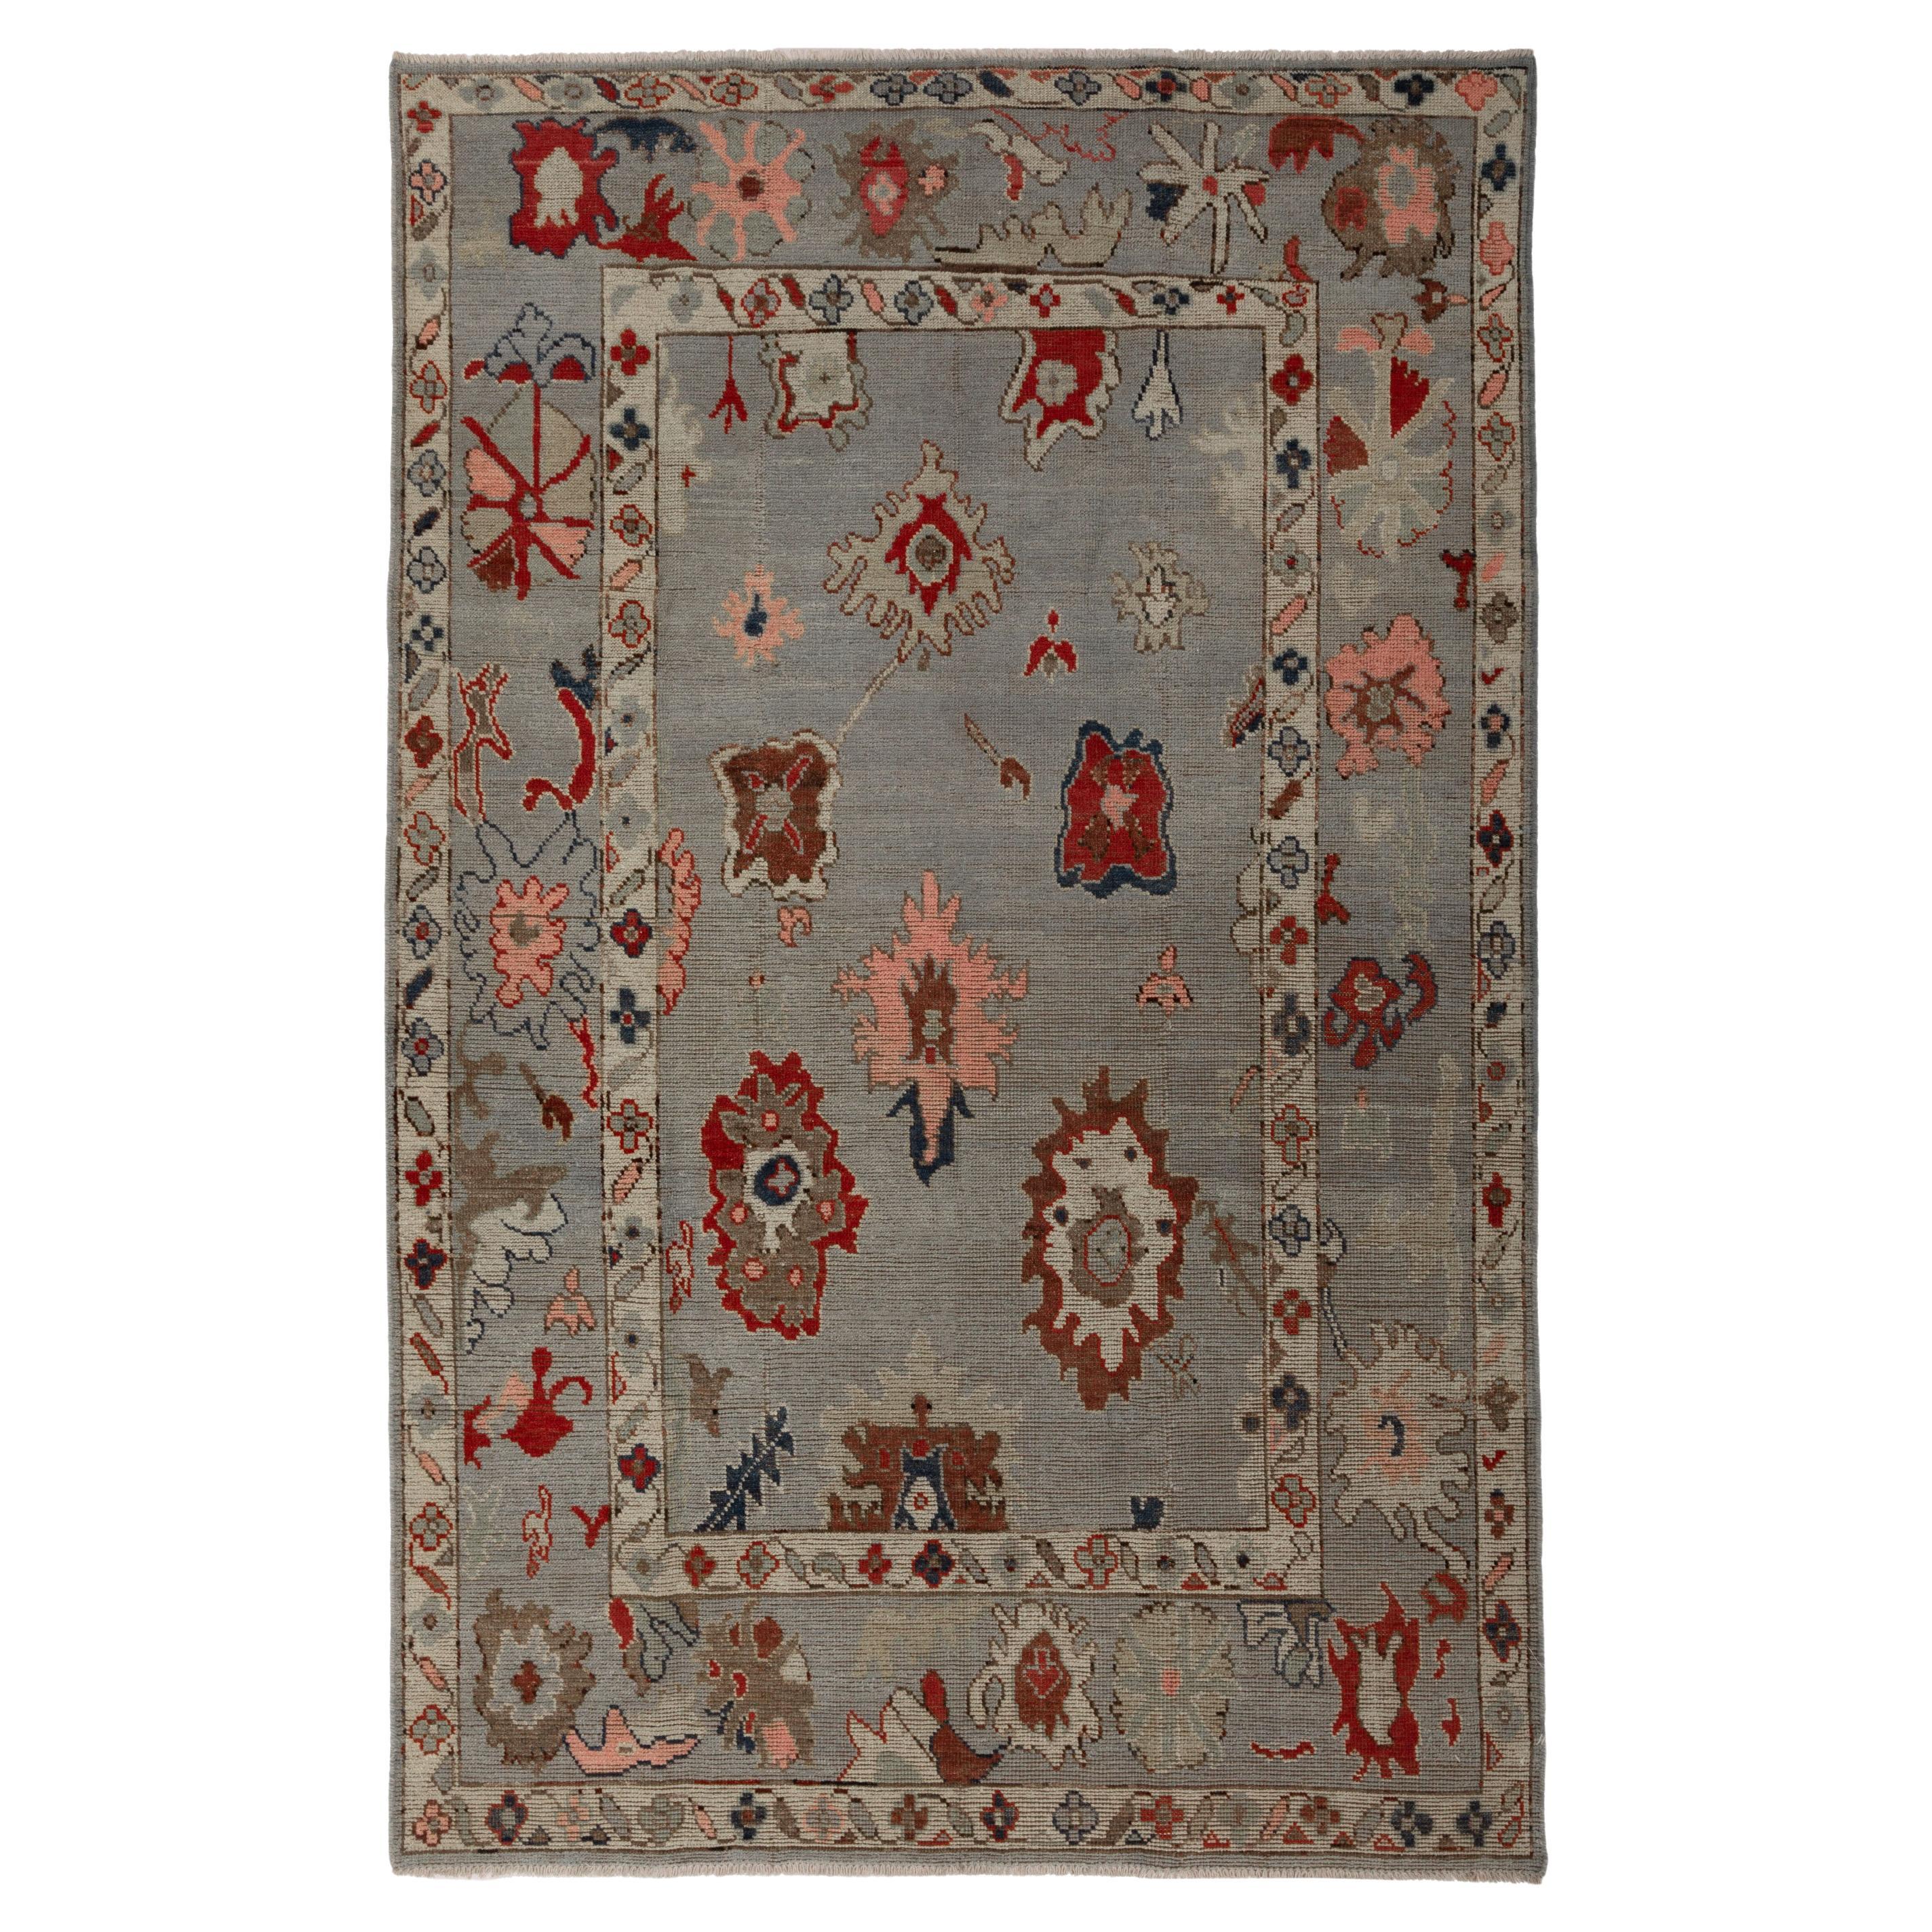 abc carpet Zameen Multicolored Floral Wool Rug - 5'4" x 8'1" For Sale